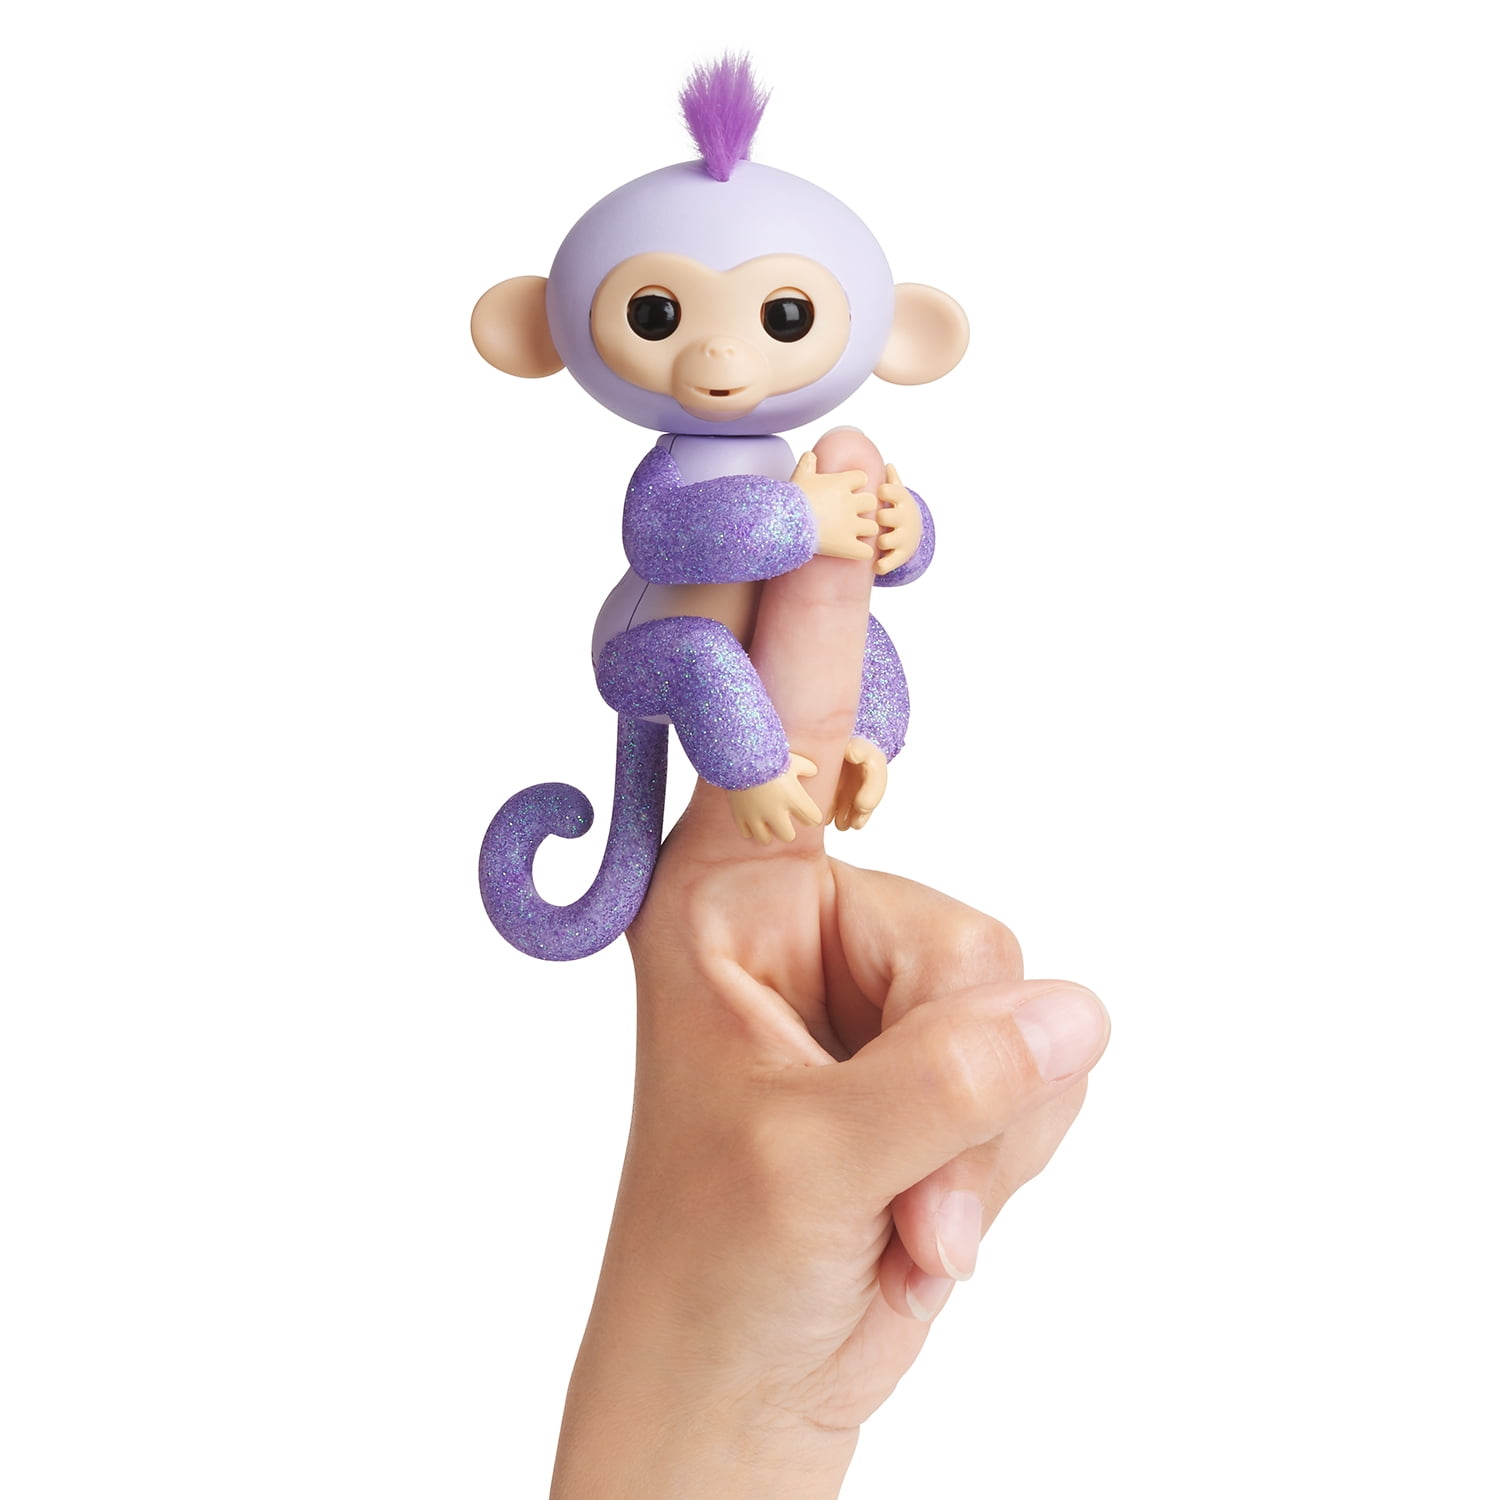 Swing /Playset with Exclusive Baby Monkey LIV Details about   Fingerlings Monkey Bar 